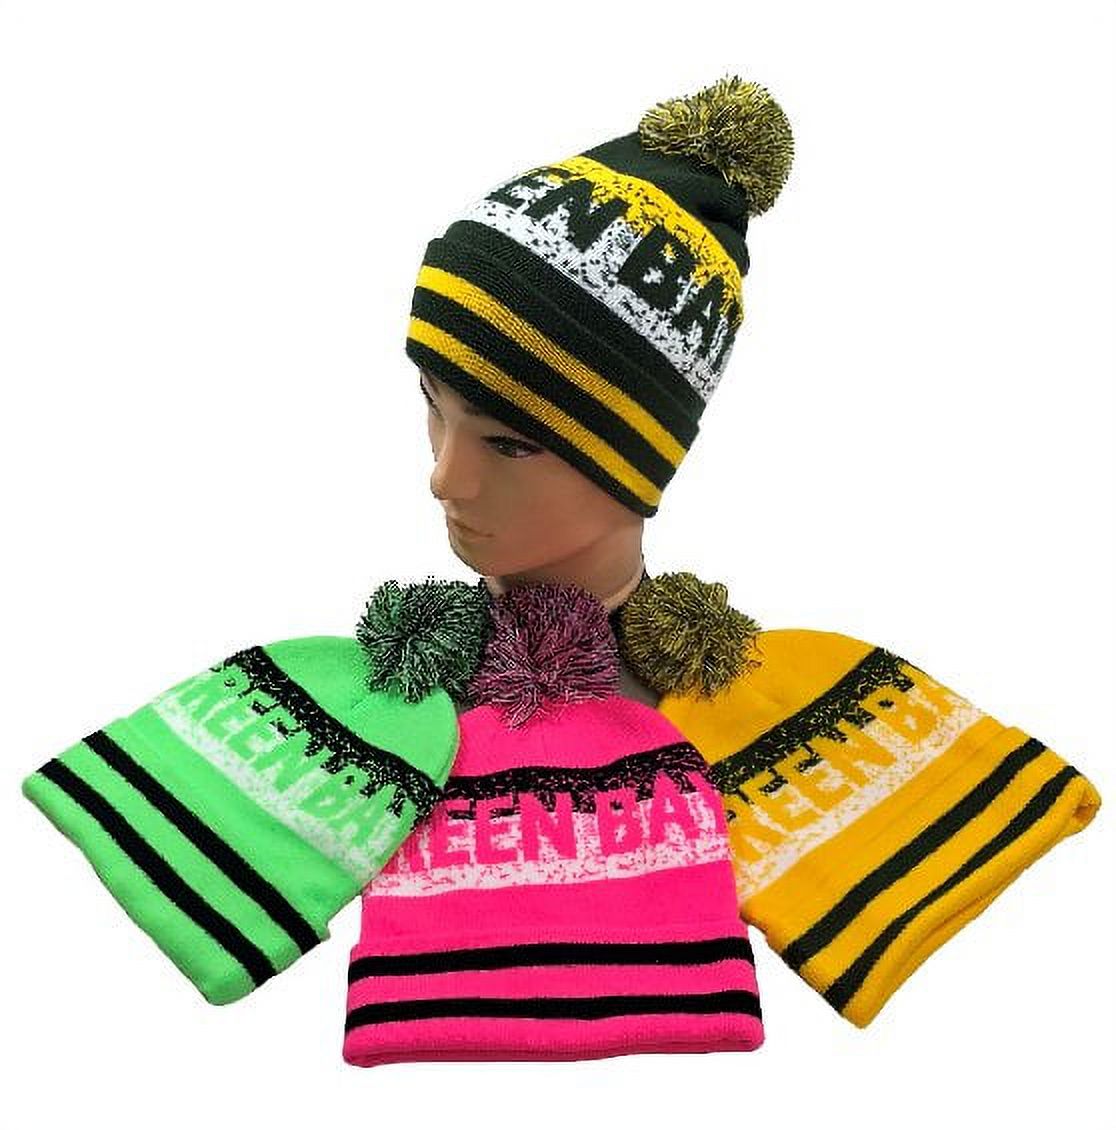 Green Bay Pixelated Adult Size Winter Knit Pom Beanie Hat (Dark Green/Gold) - image 2 of 2